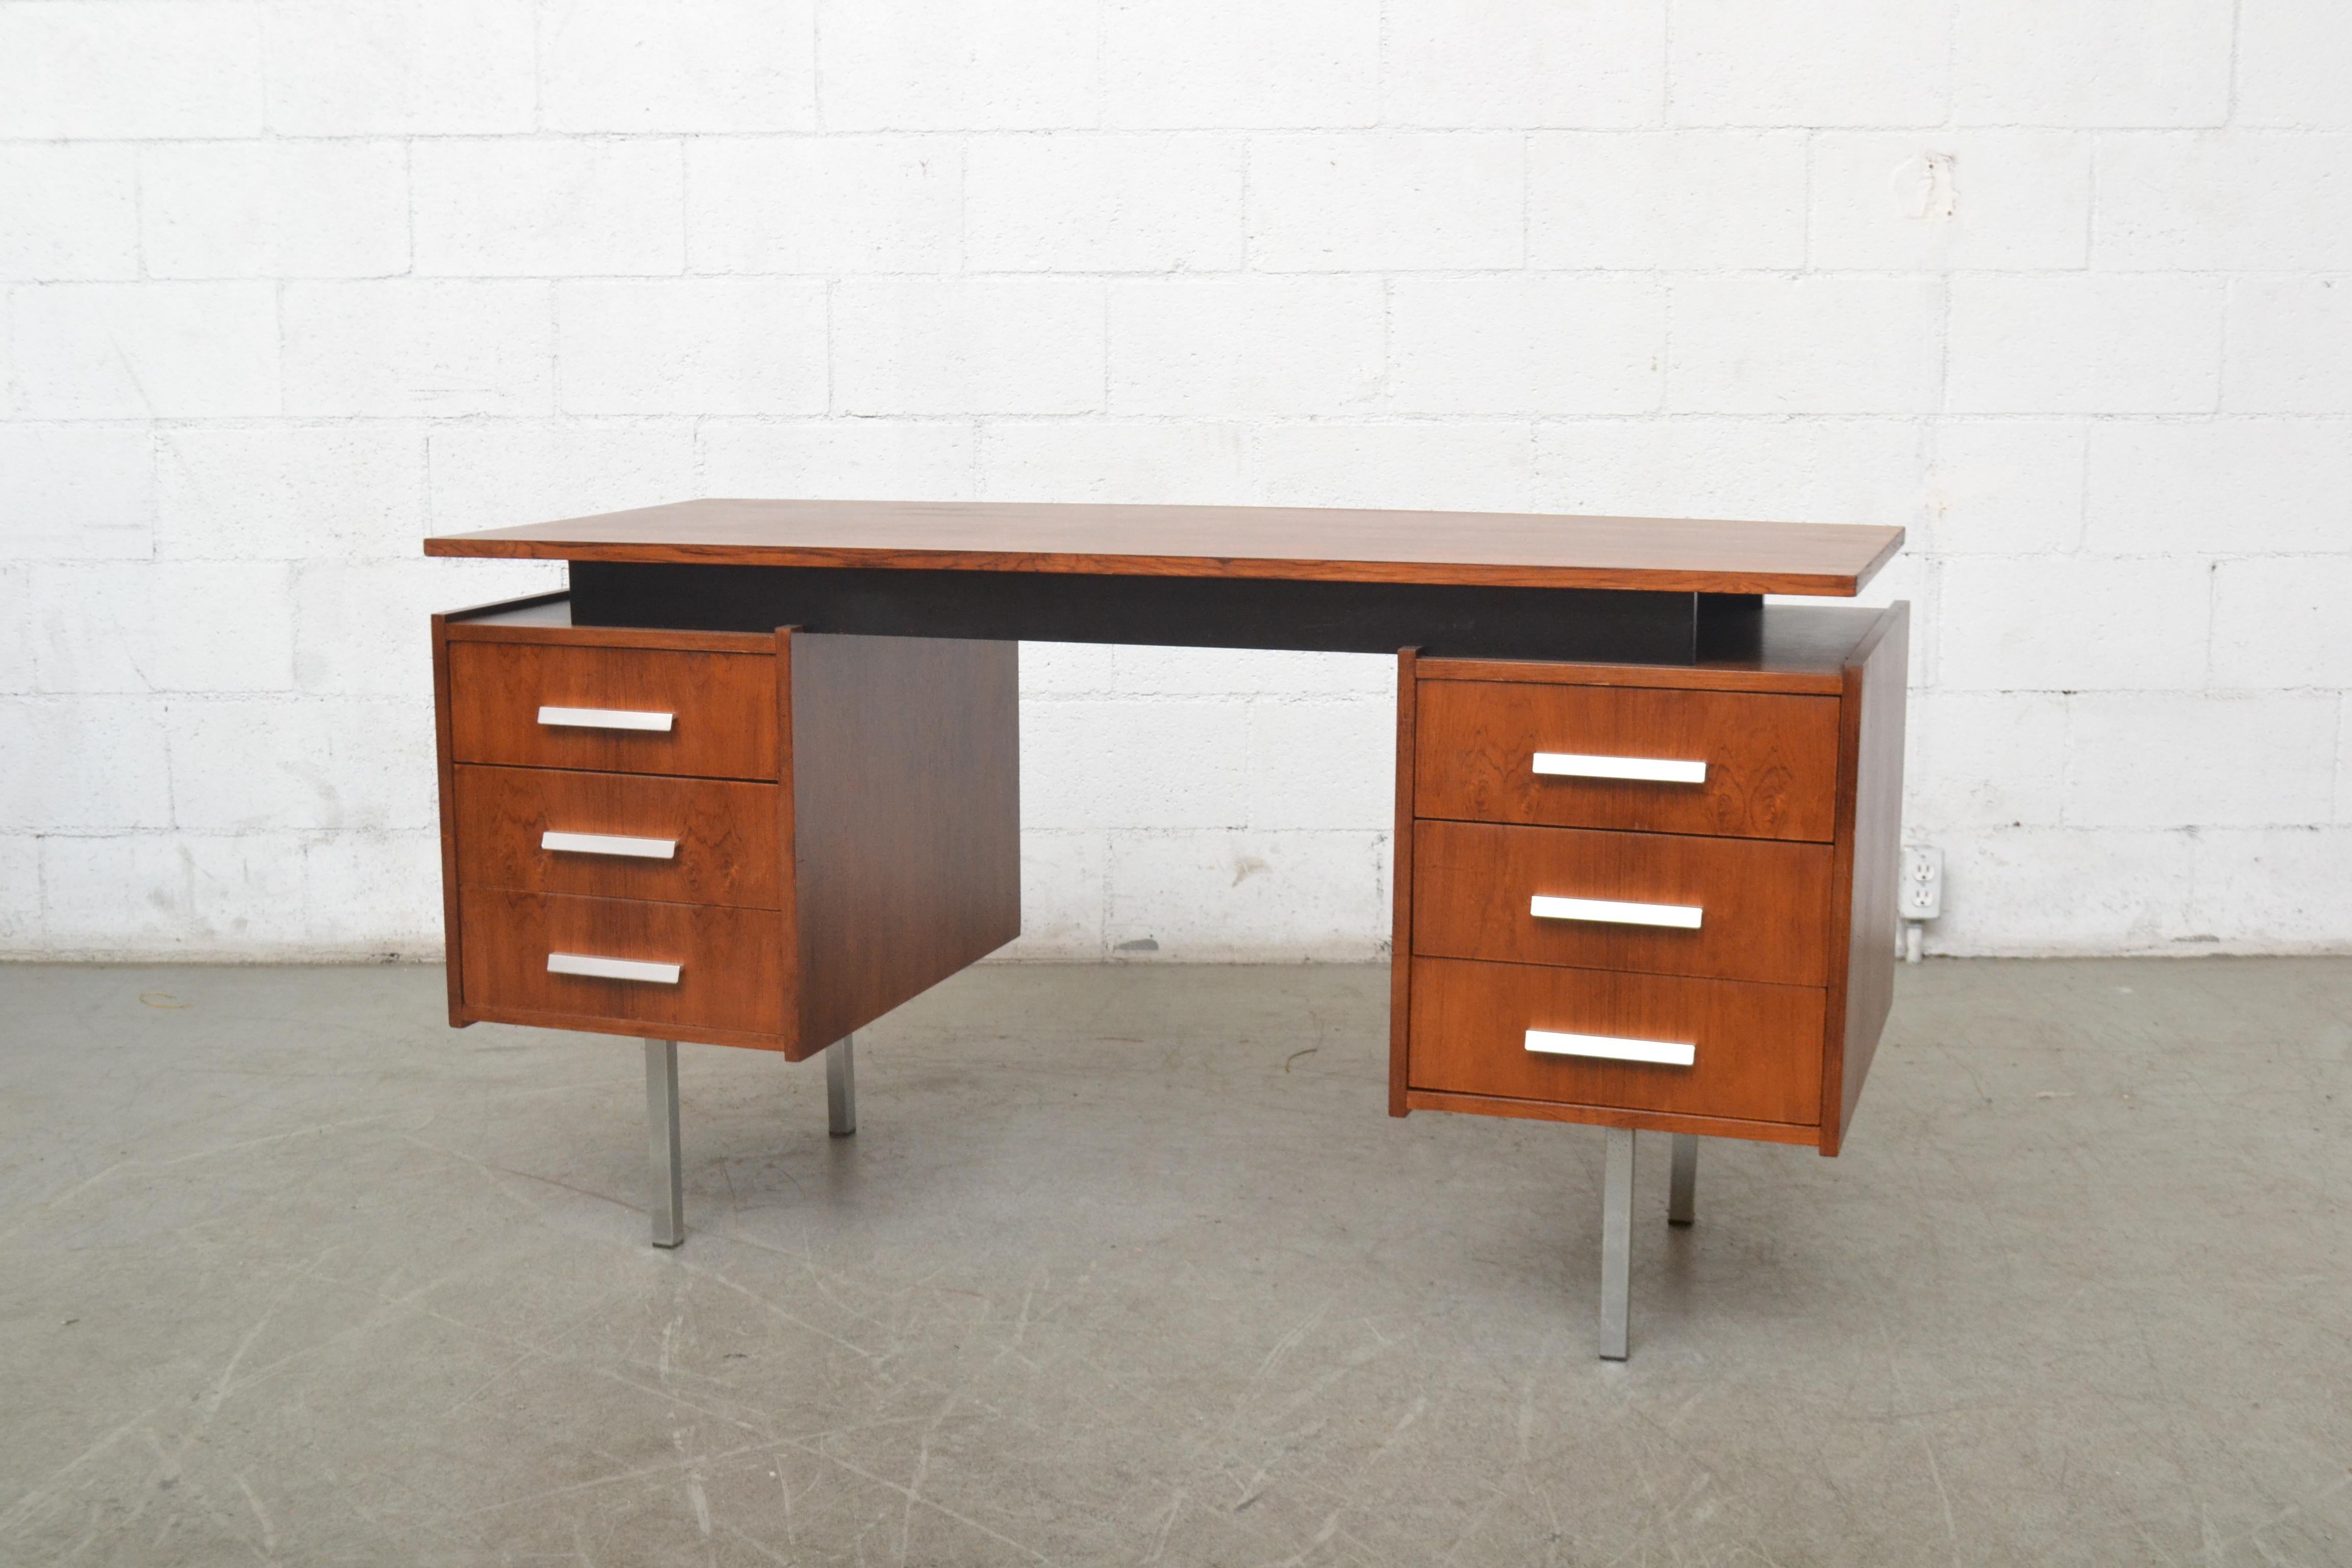 Midcentury office desk designed by Cees Braakman for Pastoe. Lightly refinished teak. Floating top with black painted wood riser. 3 sliding drawers on each side with aluminum pulls and chrome legs.